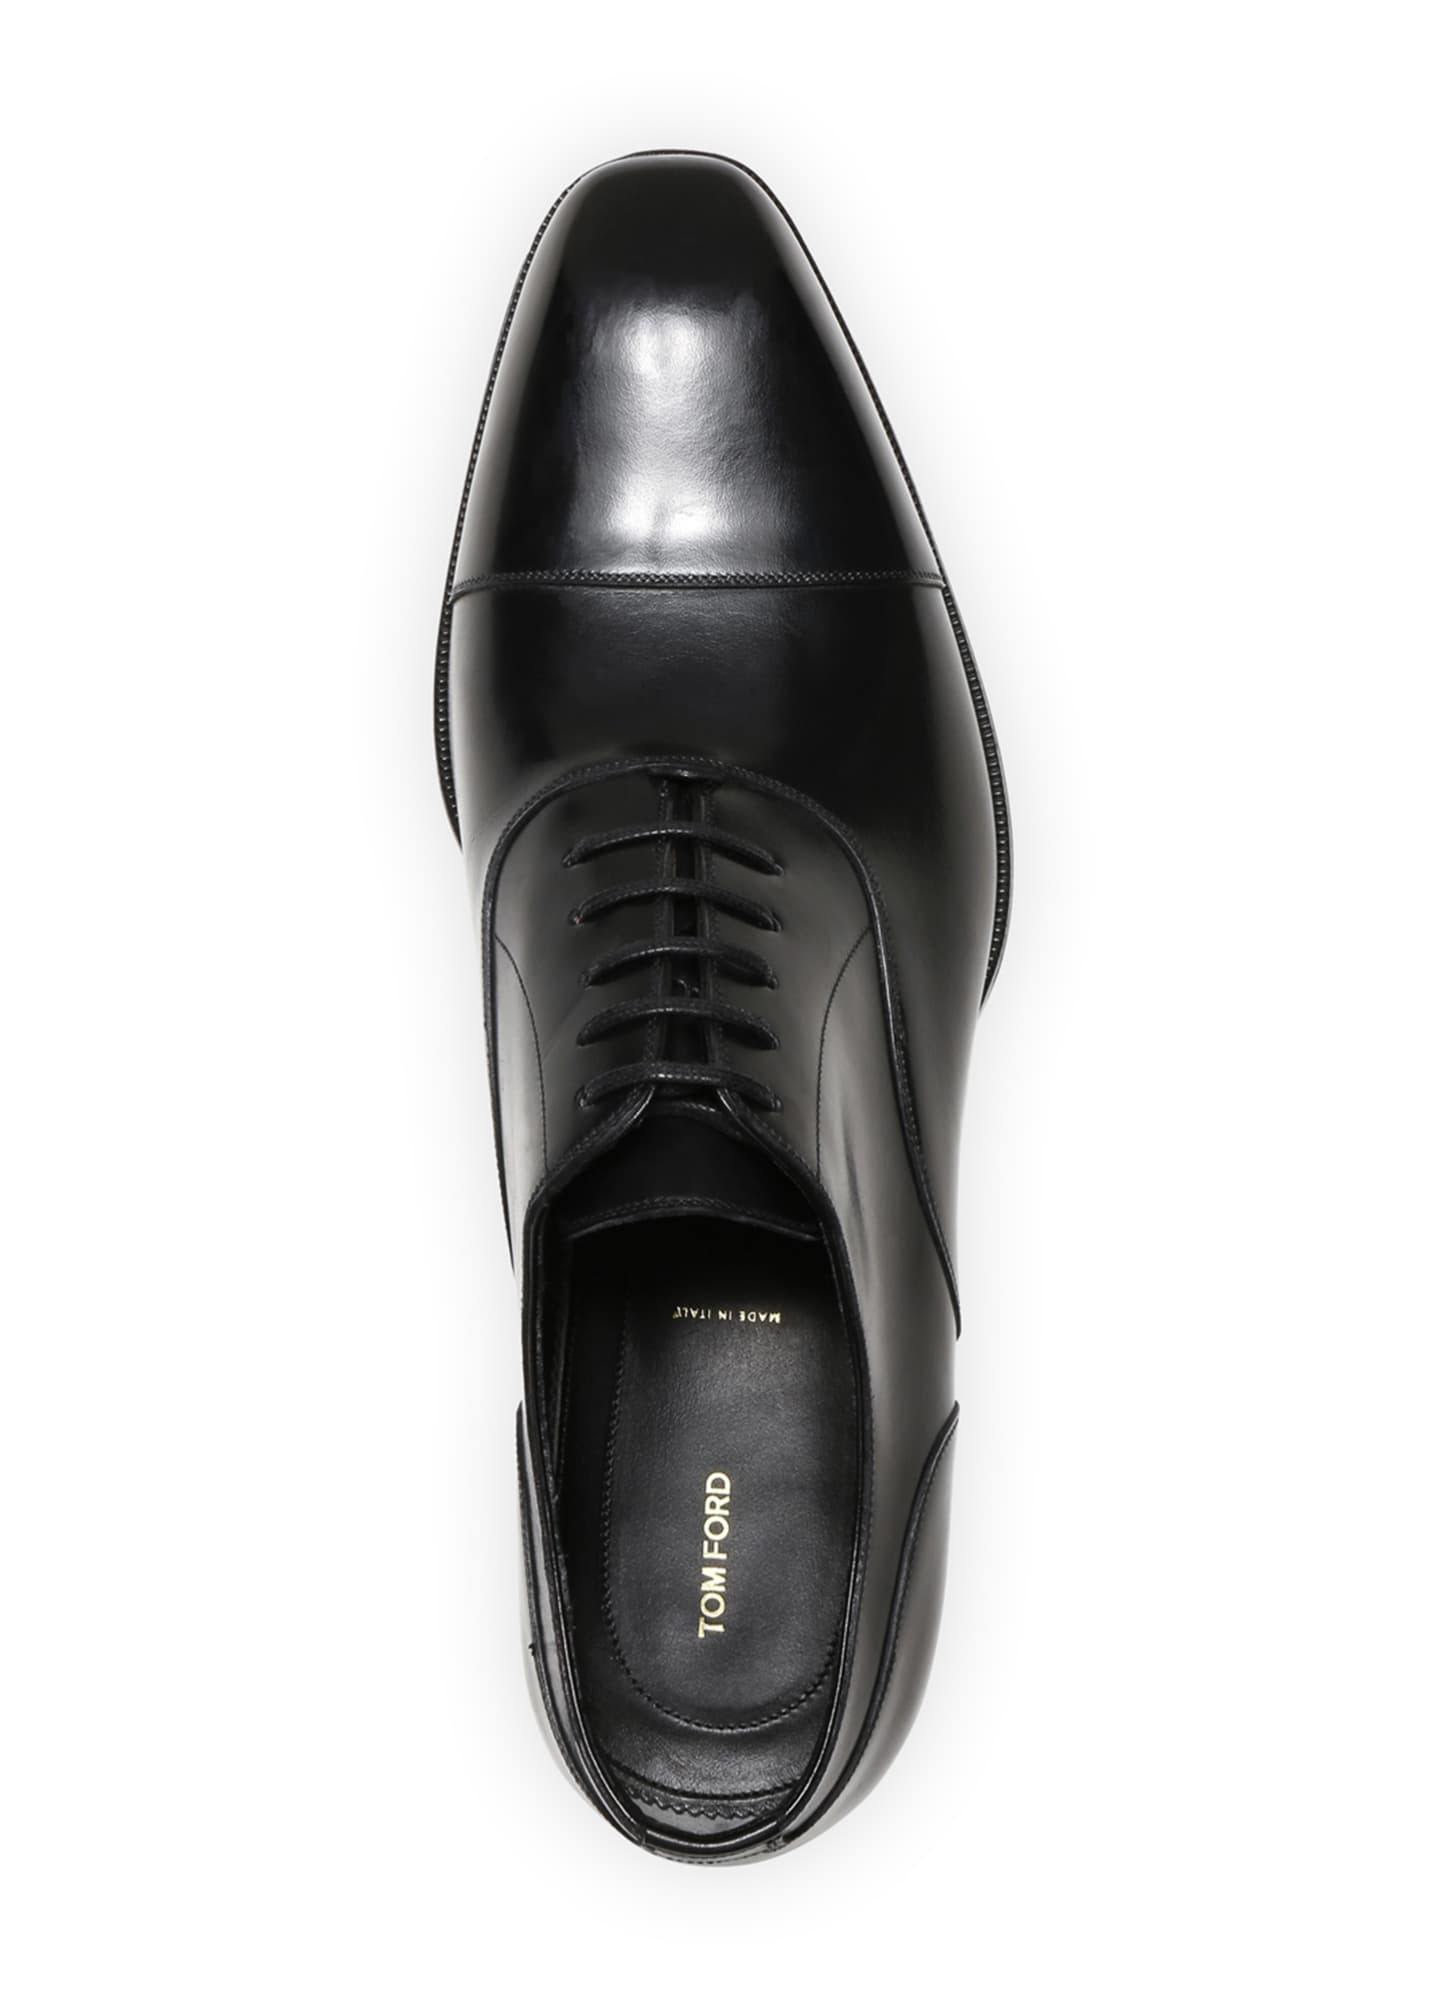 Tom Ford Mens Formal Leather Cap Toe Oxford Shoes Bergdorf Goodman